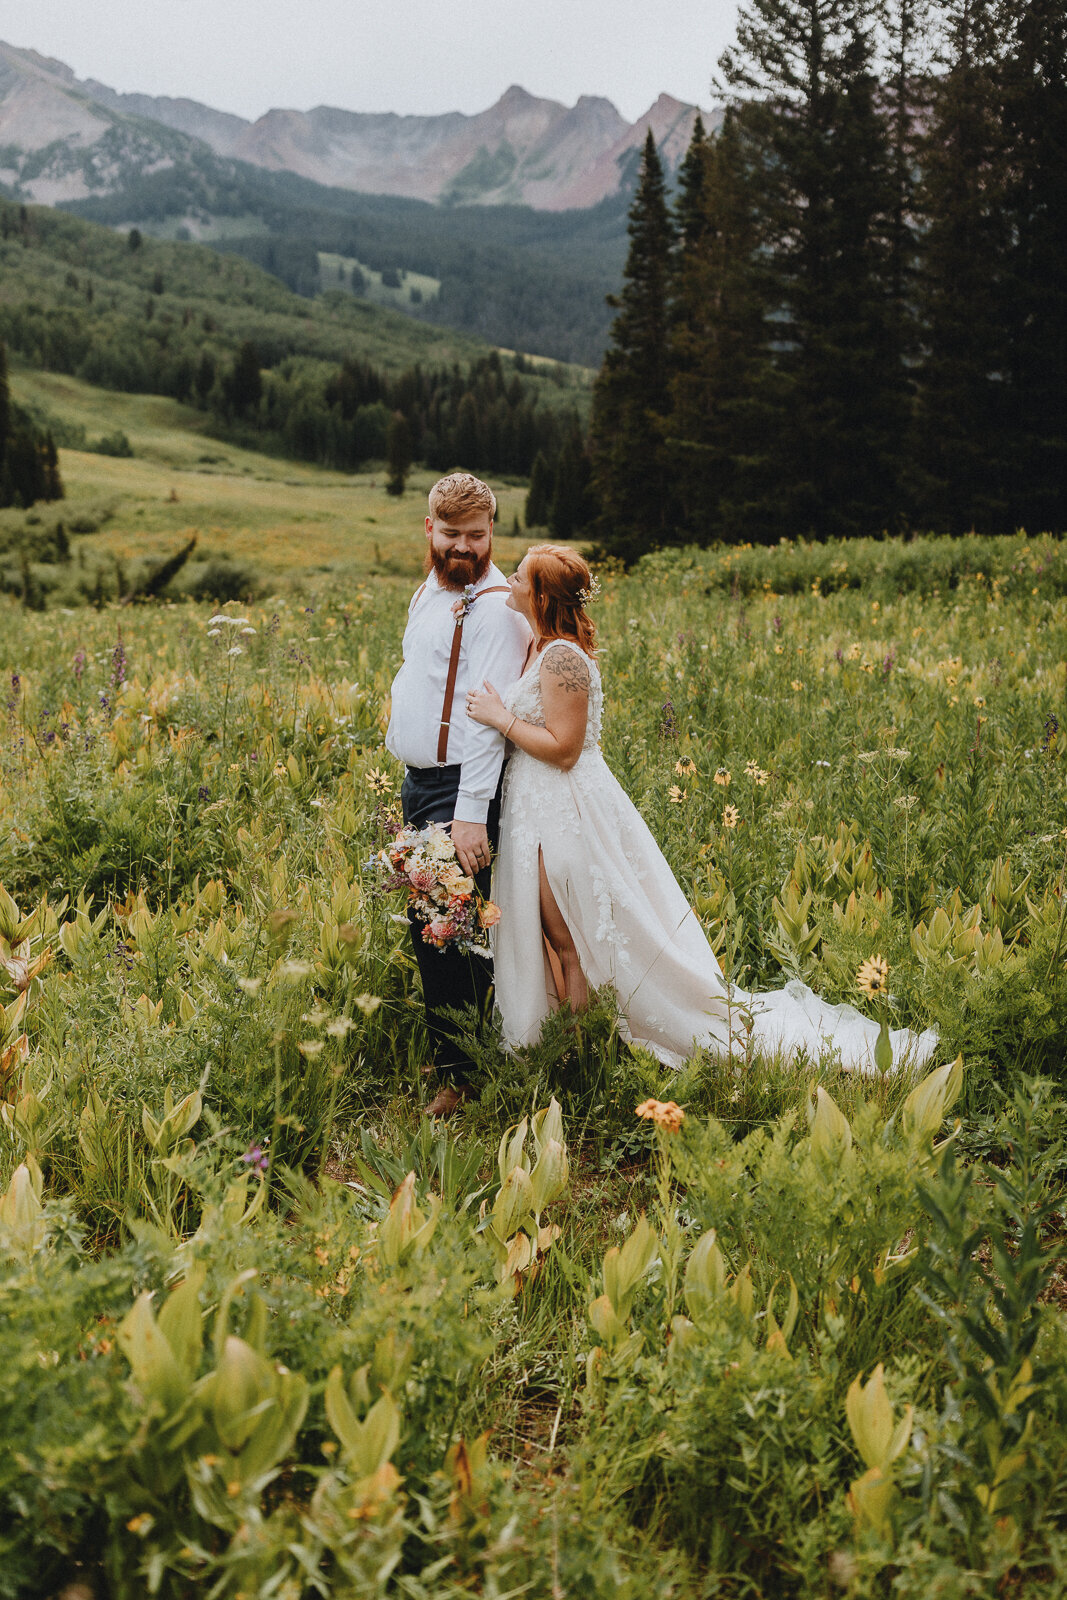 Elope with Style: Jessica Margaret's Artistic Lens on Colorado's Breathtaking Backdrops